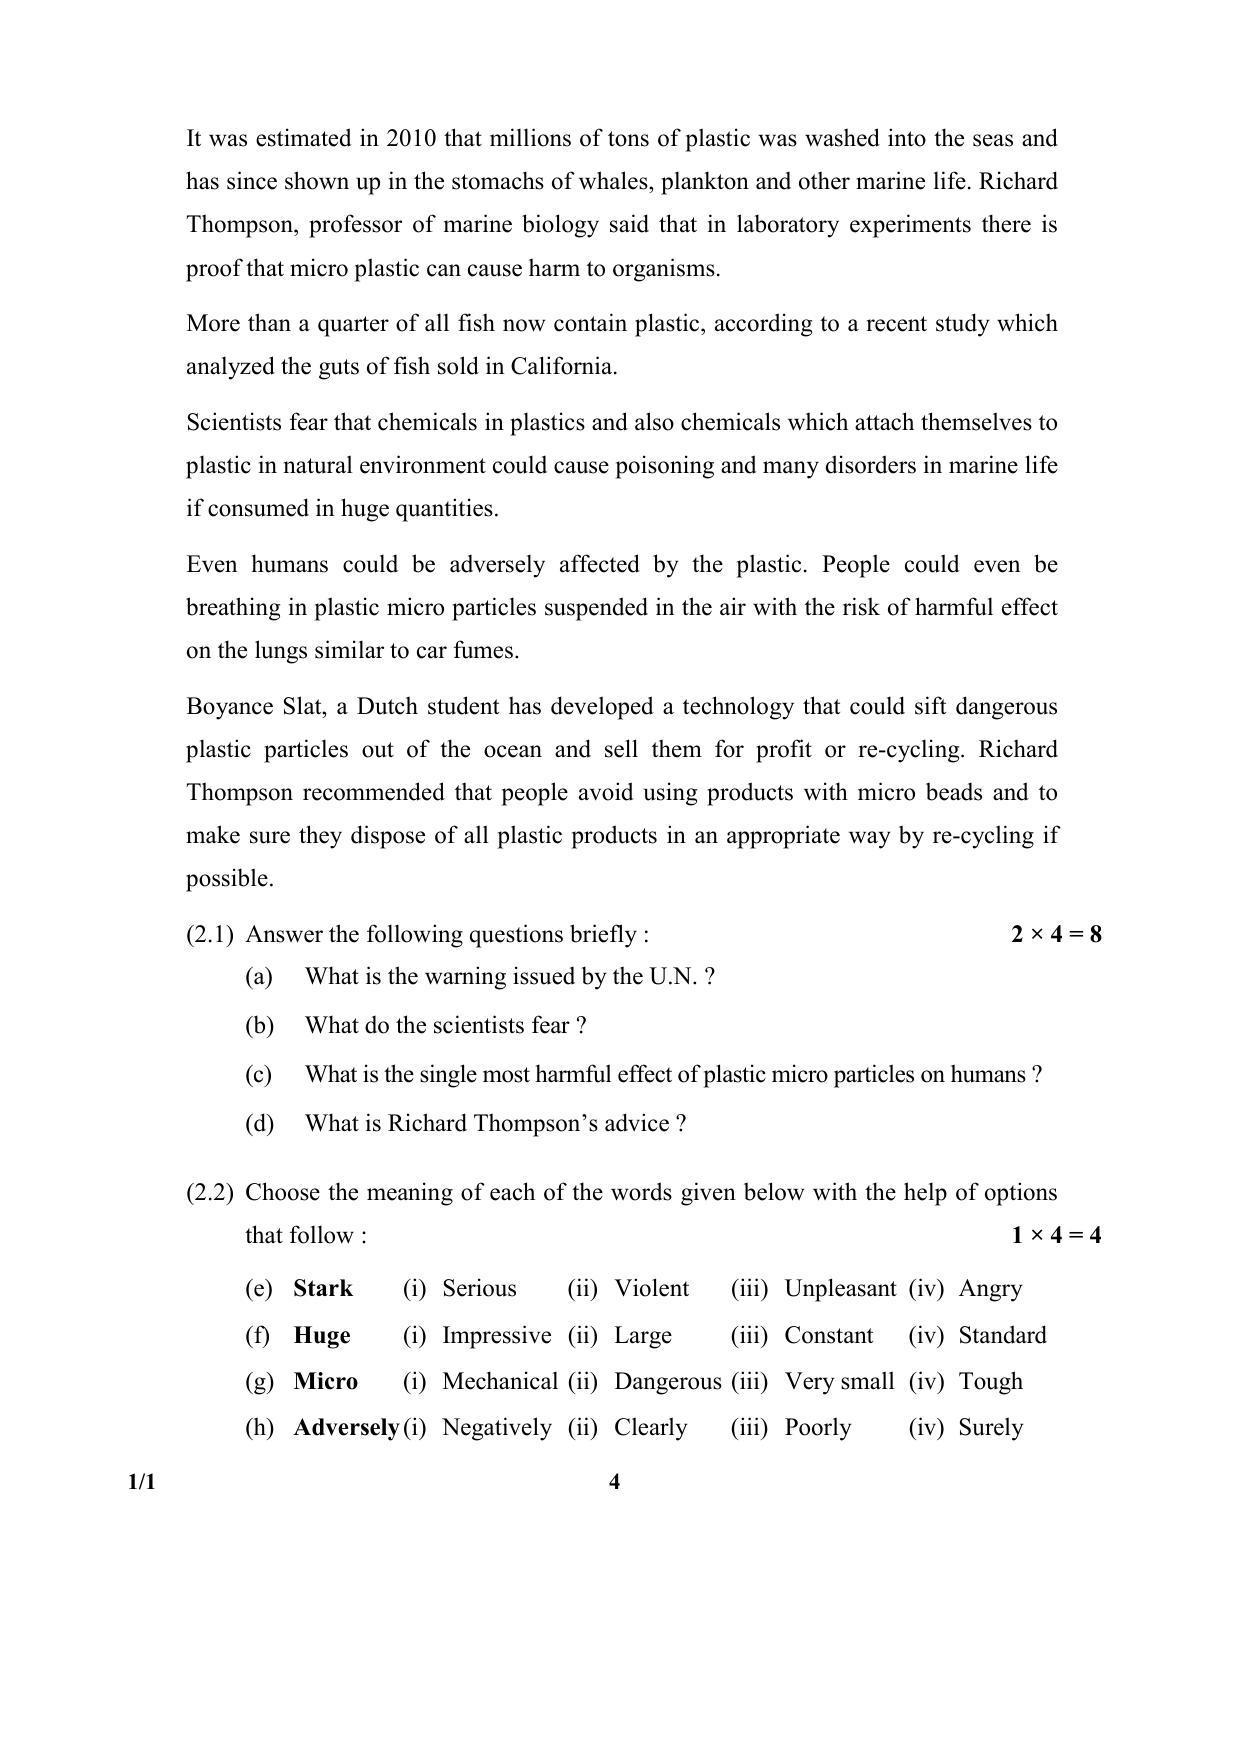 CBSE Class 10 1-1 (English) 2017-comptt Question Paper - Page 4